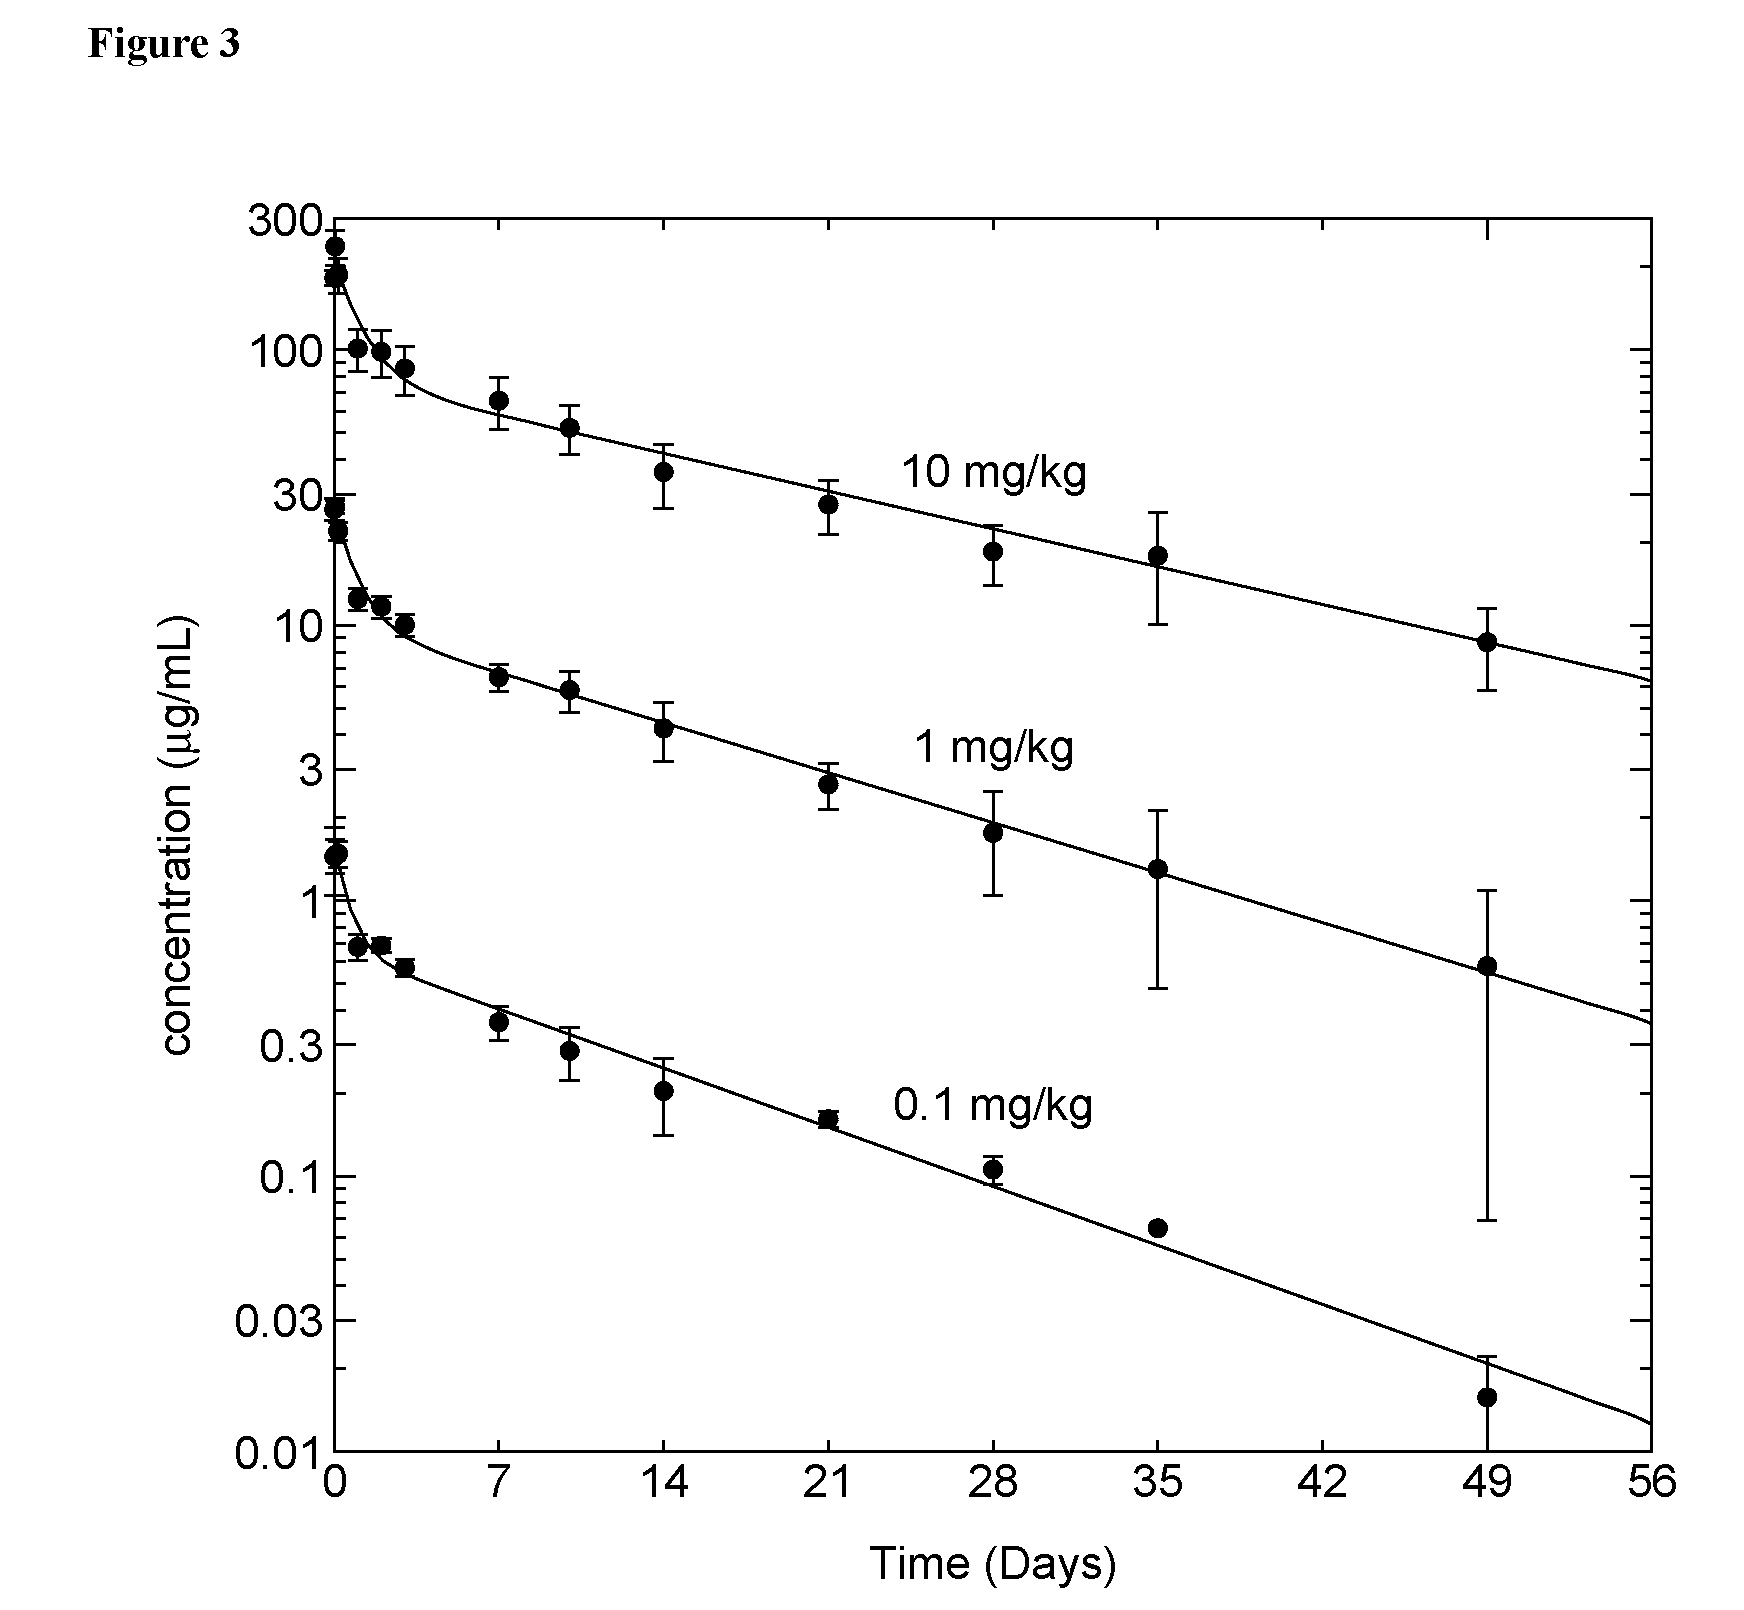 Methods for the treatment of IL-1β related diseases